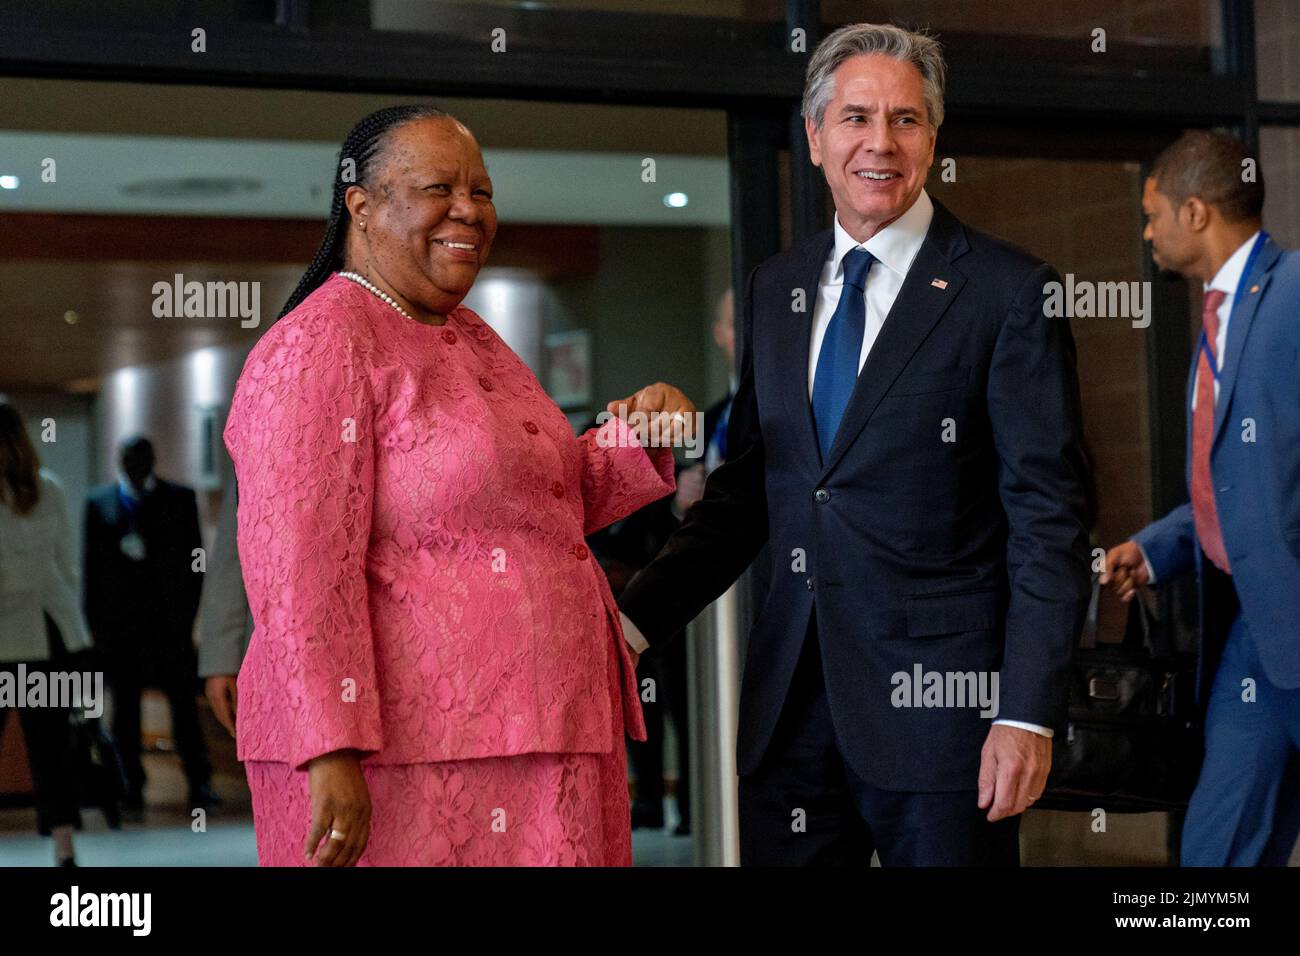 U.S. Secretary of State Antony Blinken is greeted by South Africa's Foreign Minister Naledi Pandor as he arrives for a meeting at the South African Department of International Relations and Cooperation in Pretoria, South Africa, August 8, 2022. Andrew Harnik/Pool via REUTERS Stock Photo